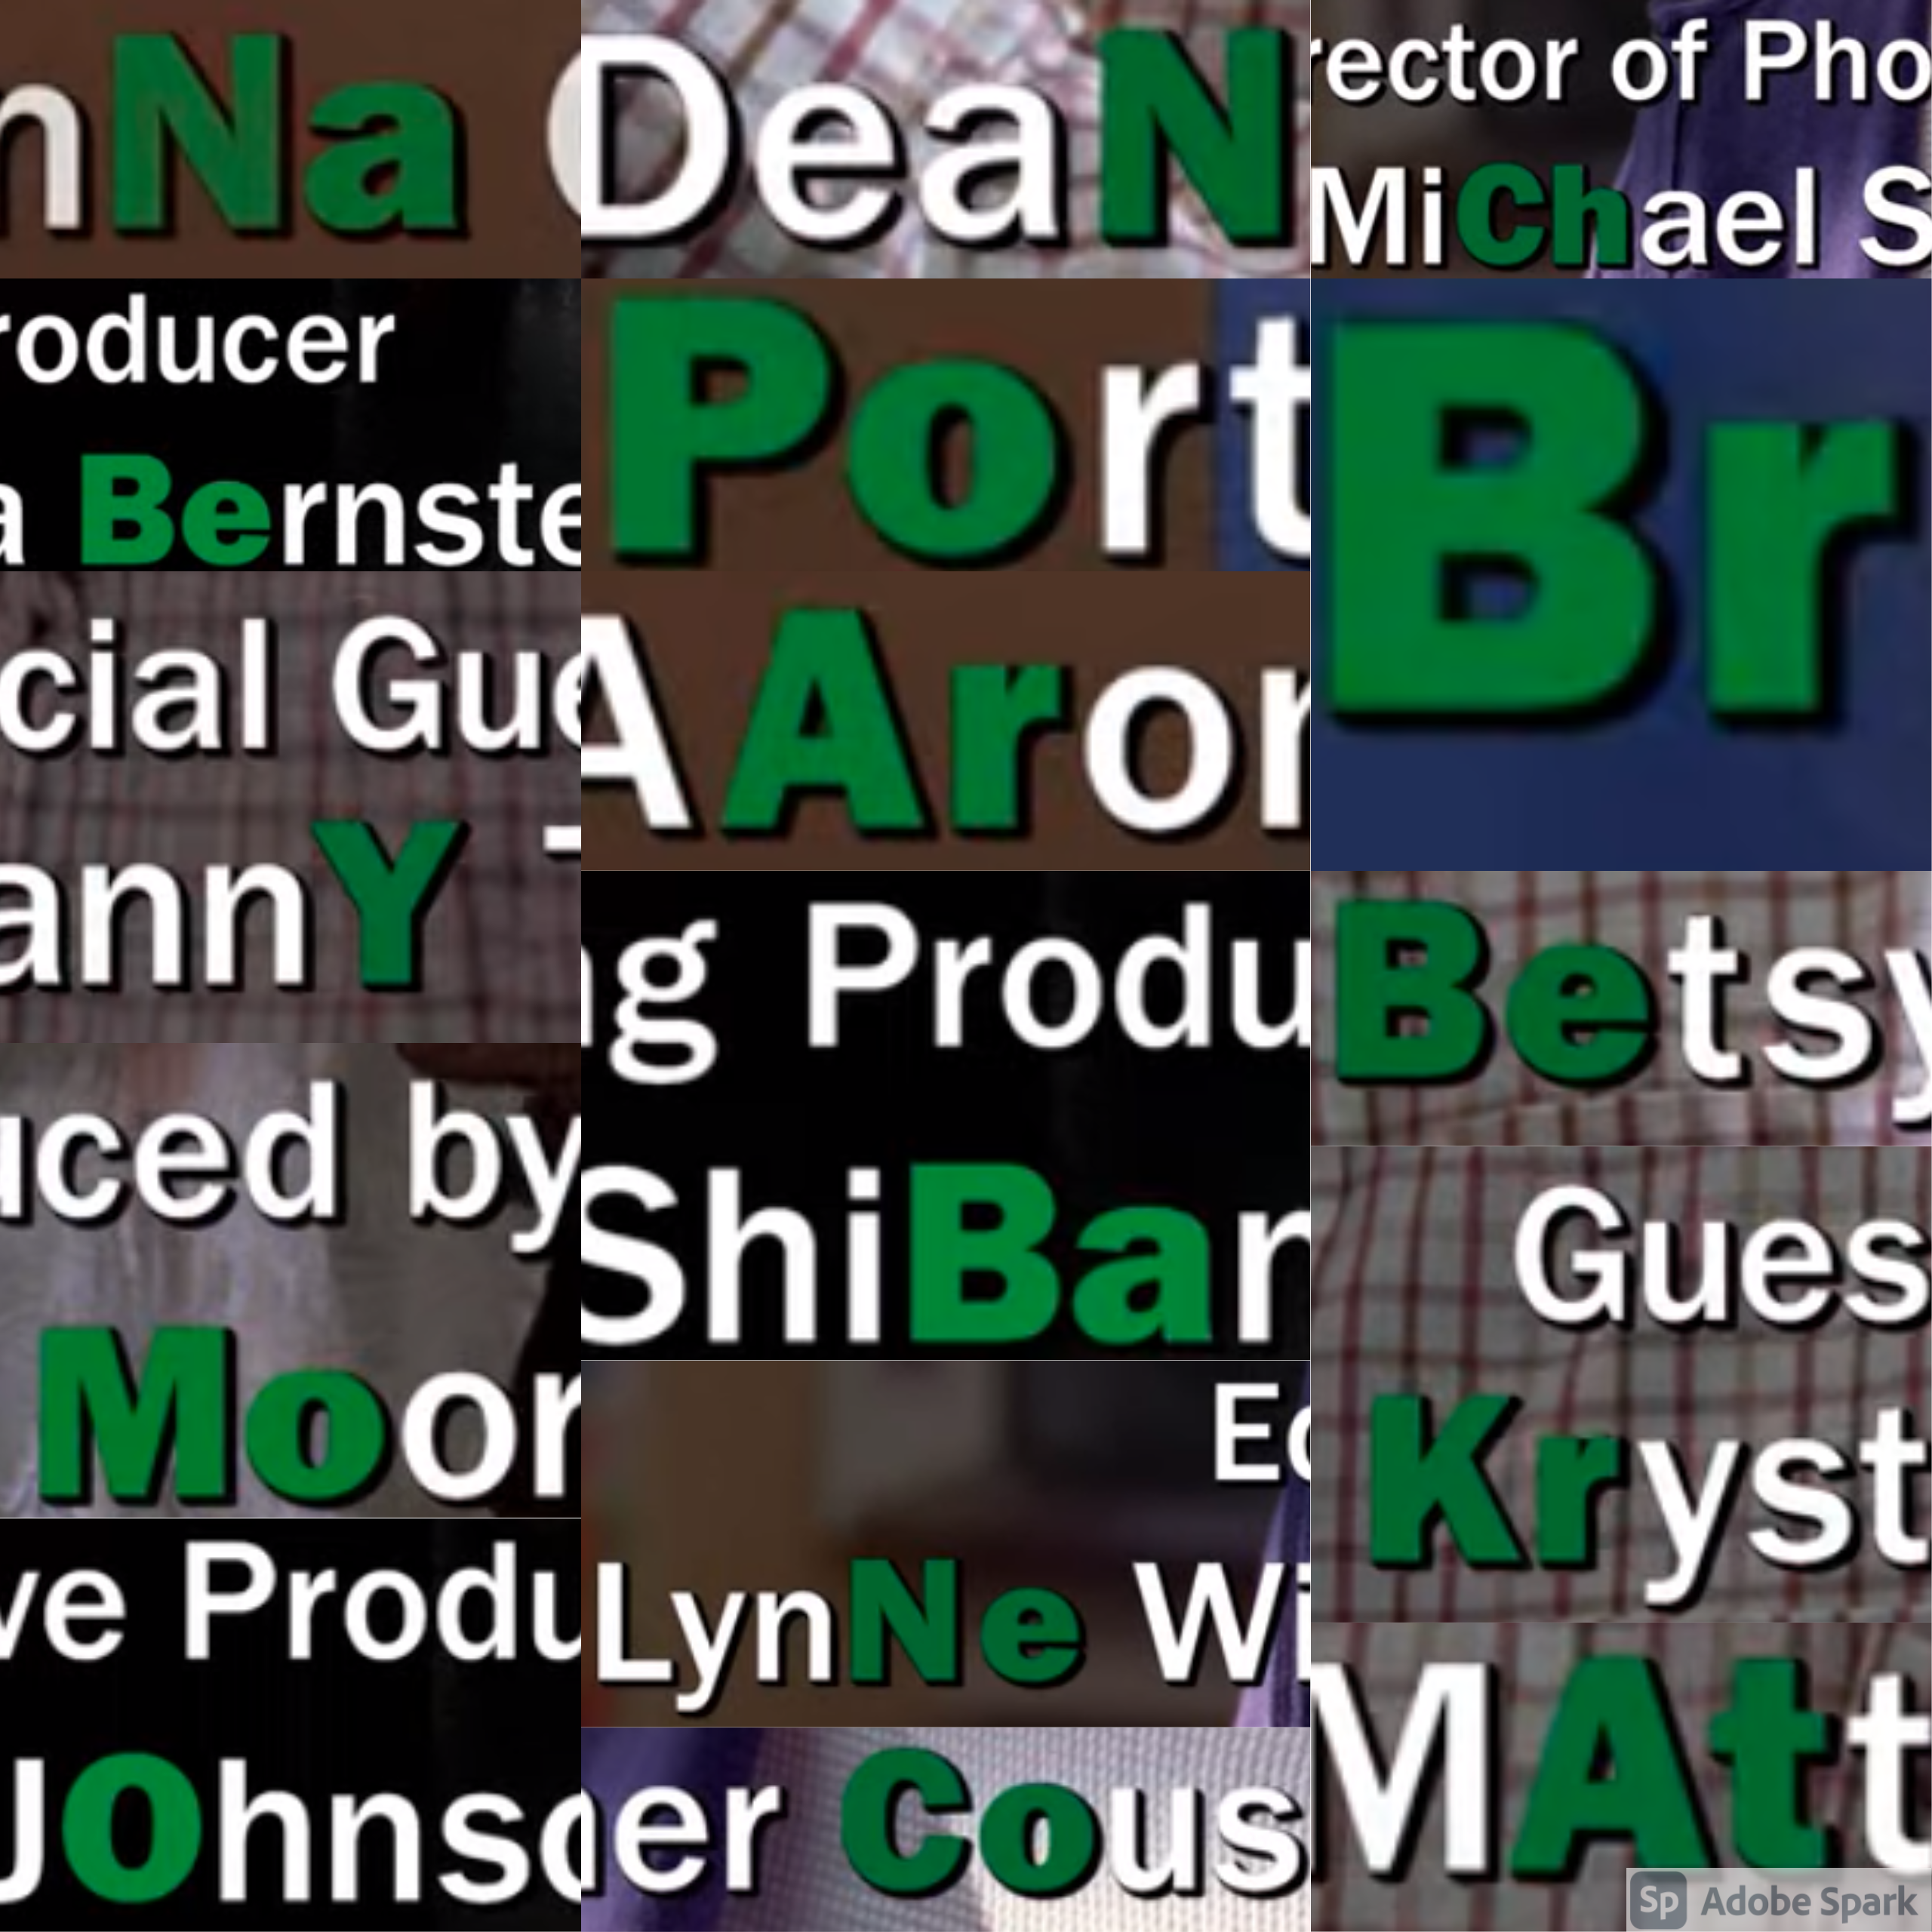 Examples of the cast names with highlighted elements